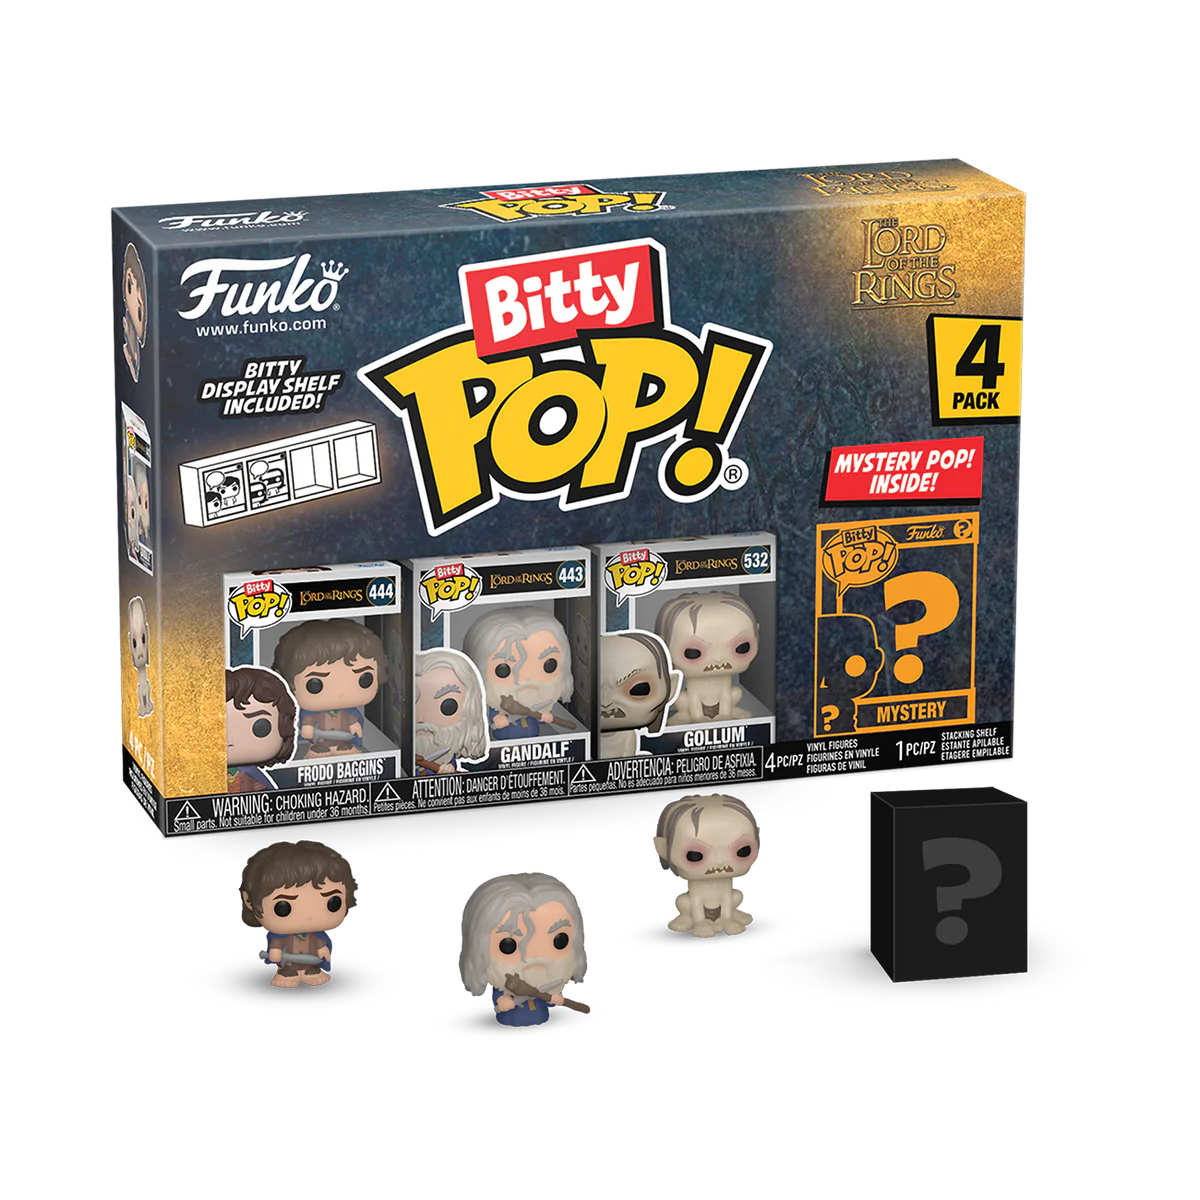 THE LORD OF THE RINGS 4-PACK SERIES 1